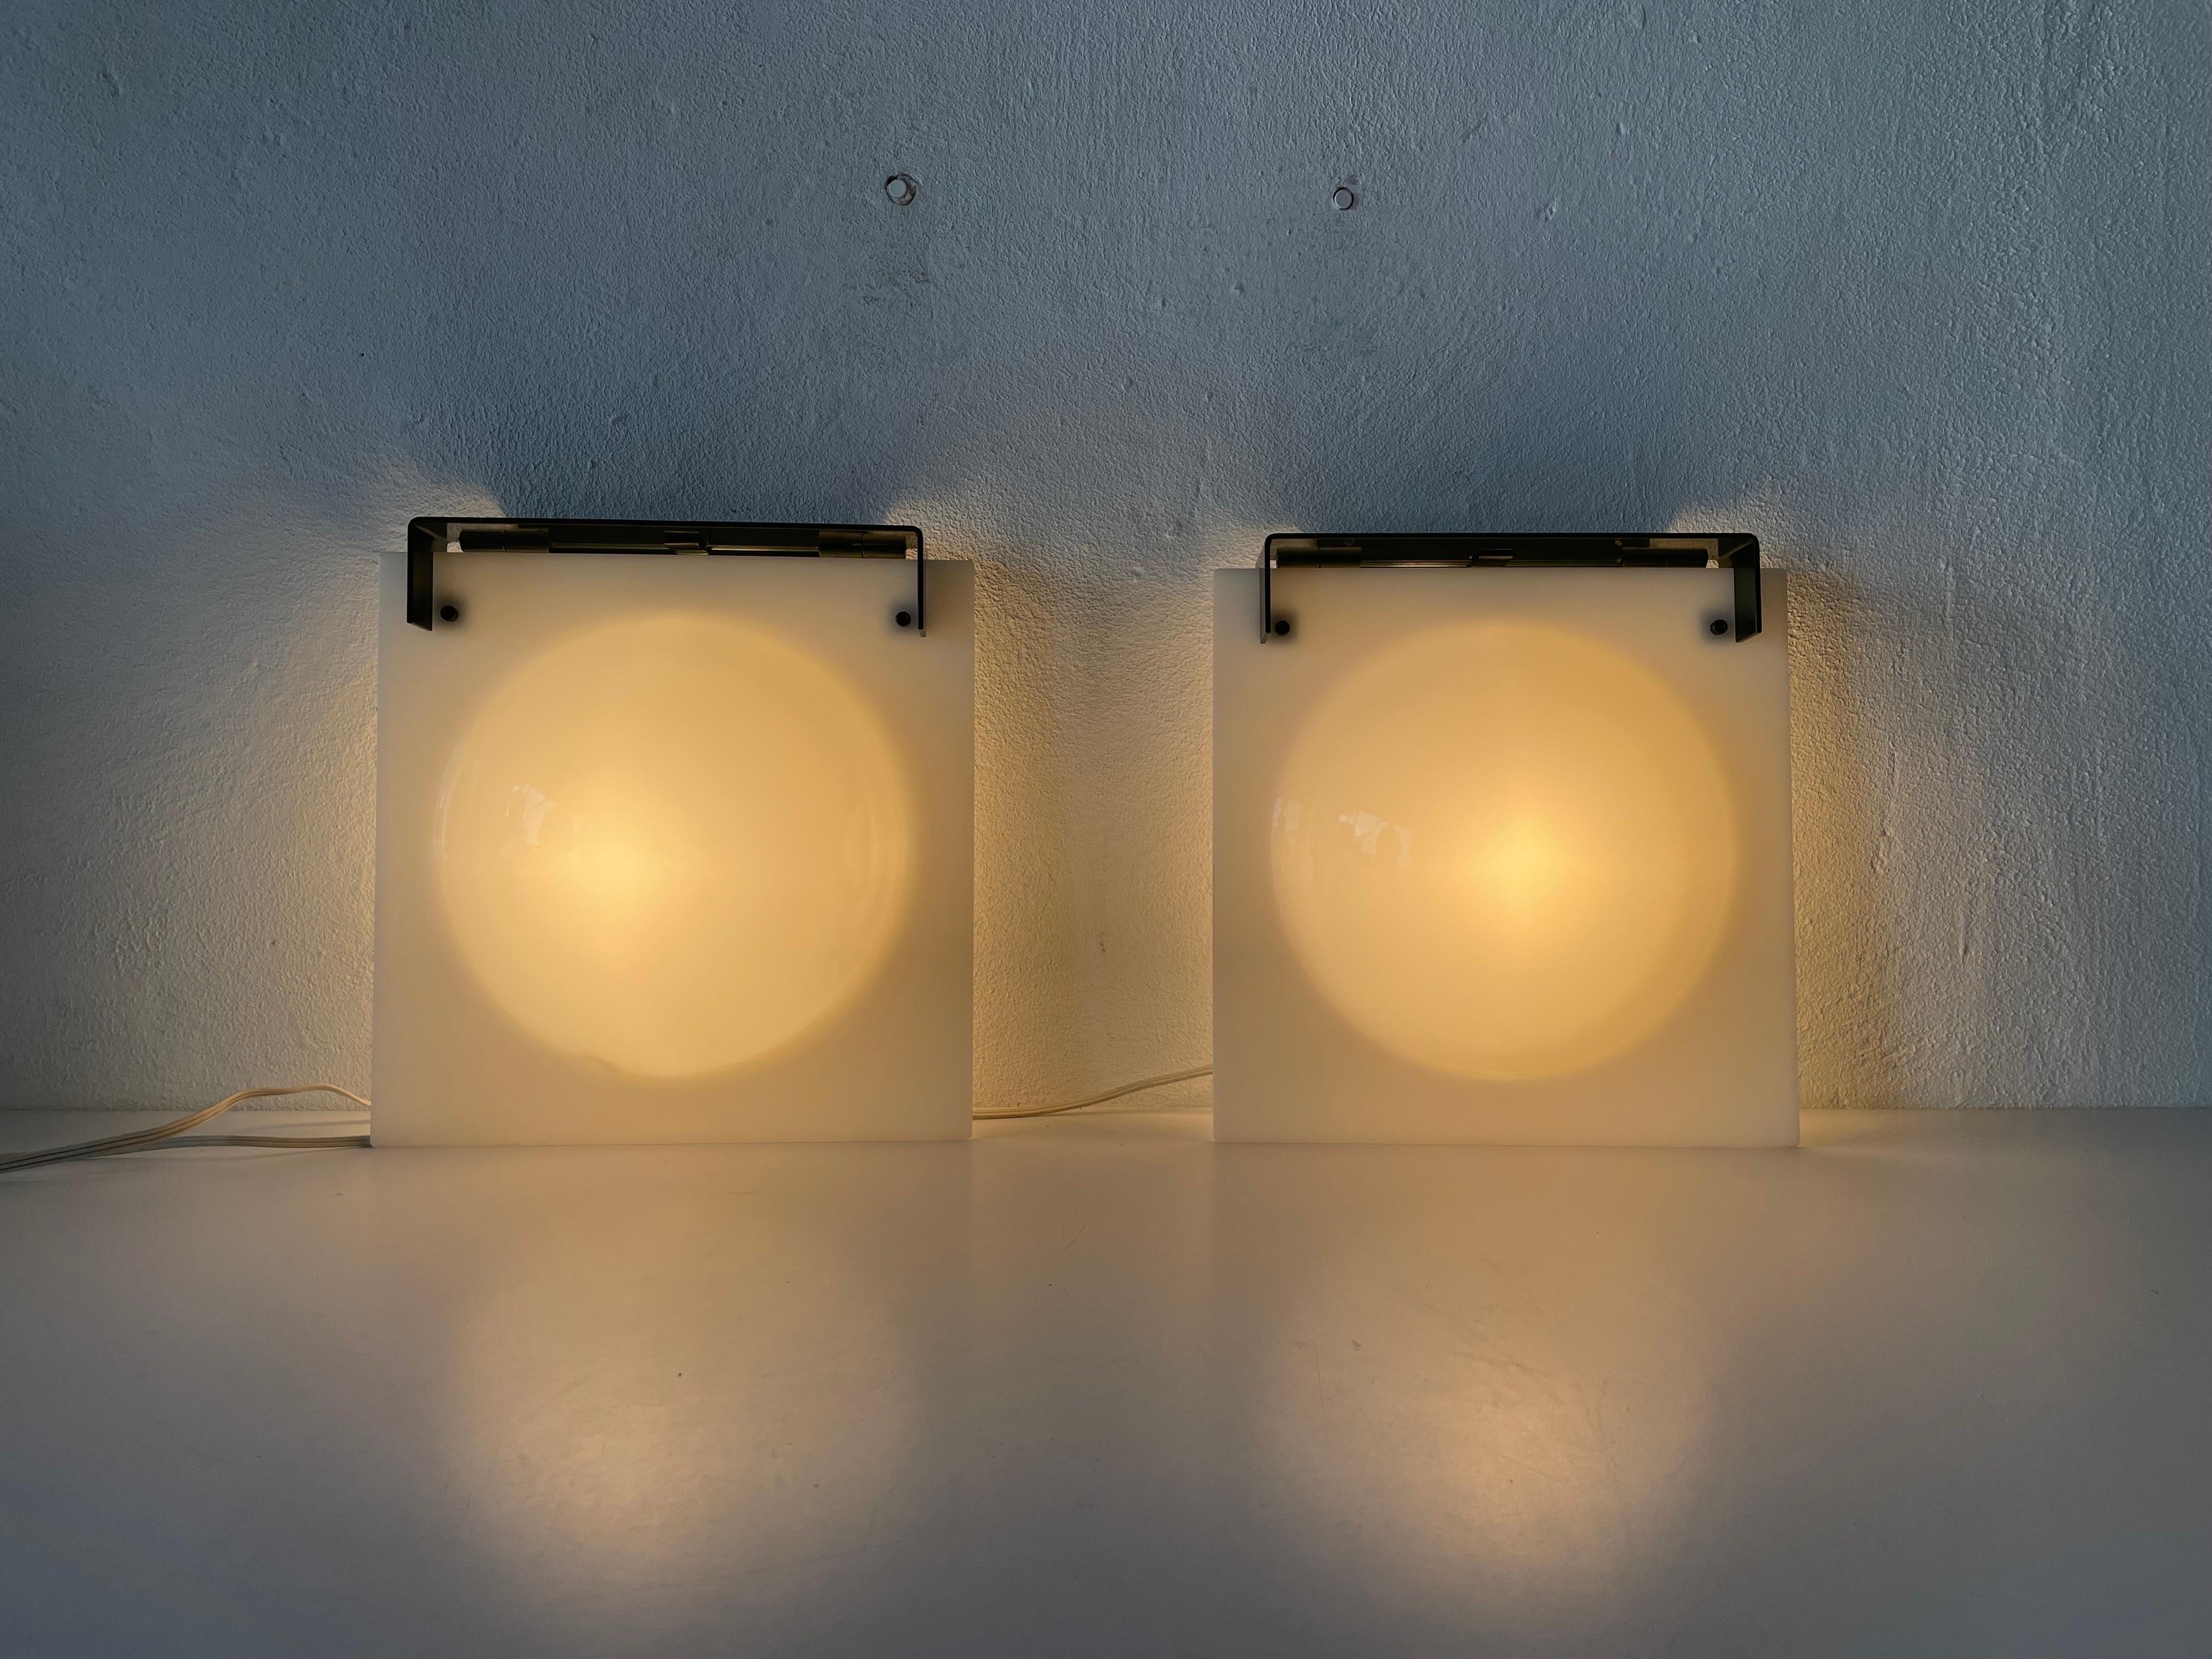 High Quality Plexiglass Bubble Design Pair of Wall Lamps, 1960s, Italy For Sale 3